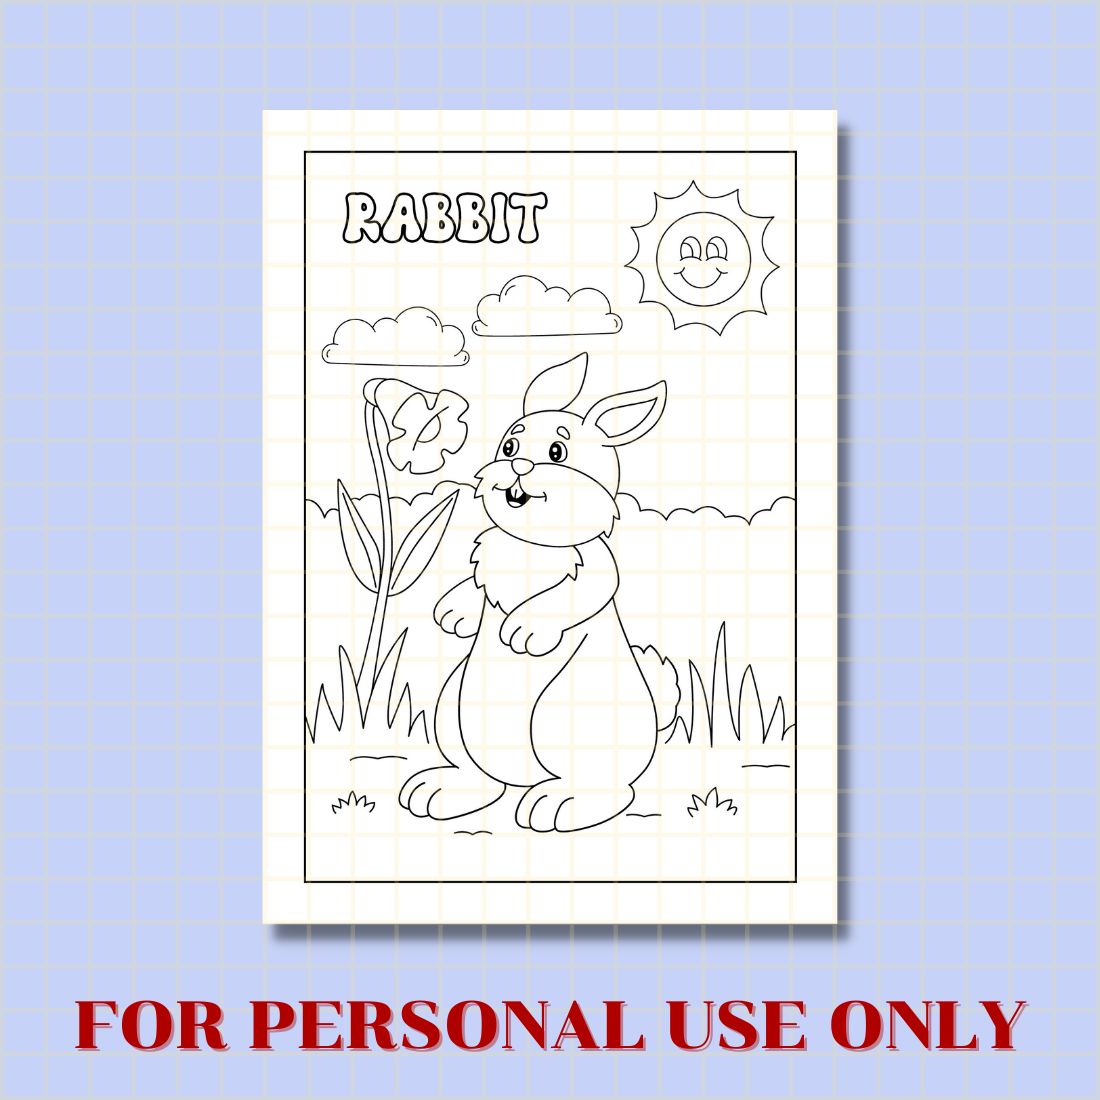 FREE RABBIT COLORING PAGE preview image.